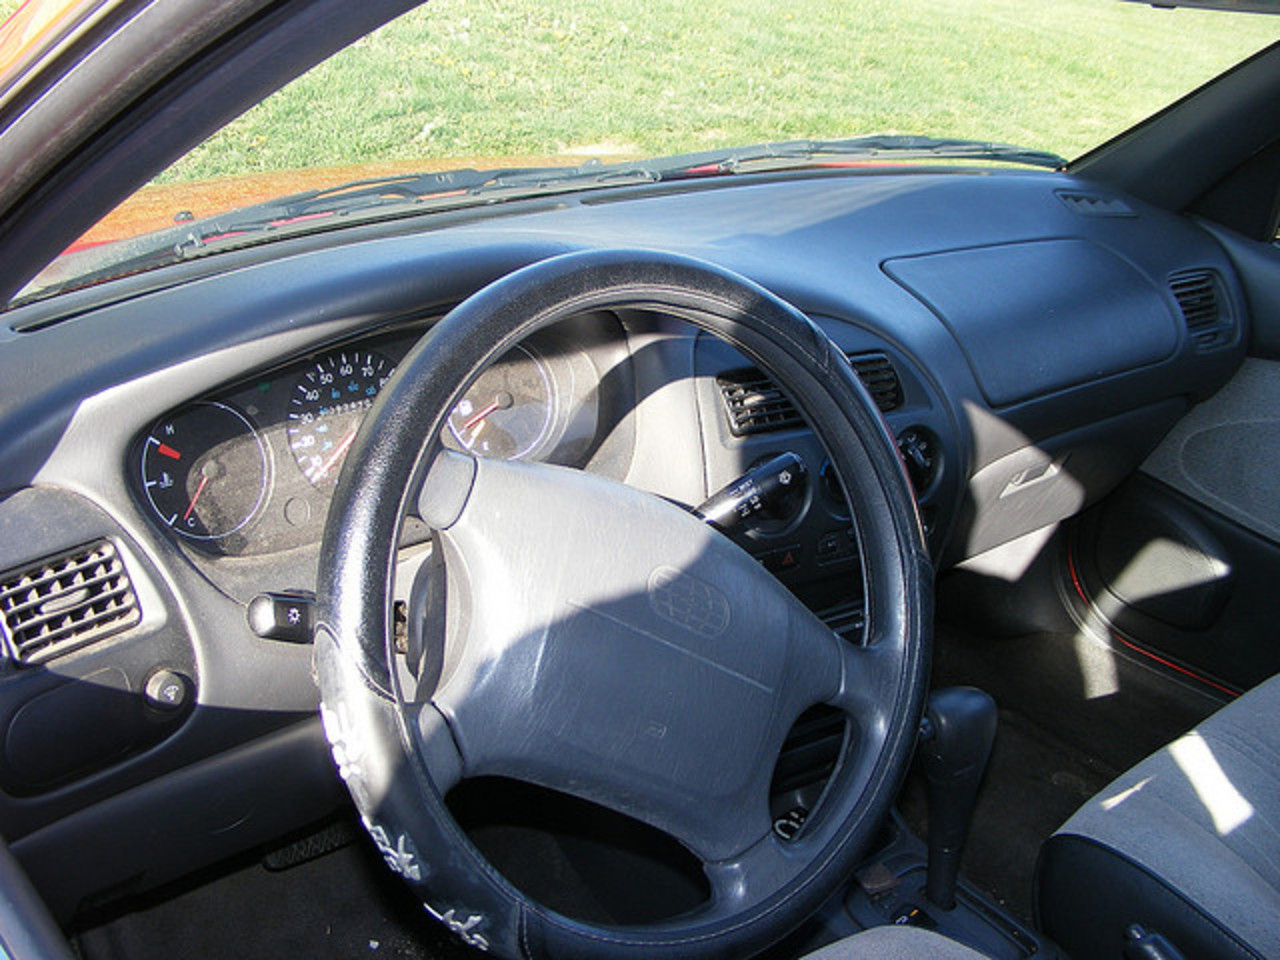 1996 Geo Prizm for Sale: Dashboard View of Odometer | Flickr ...